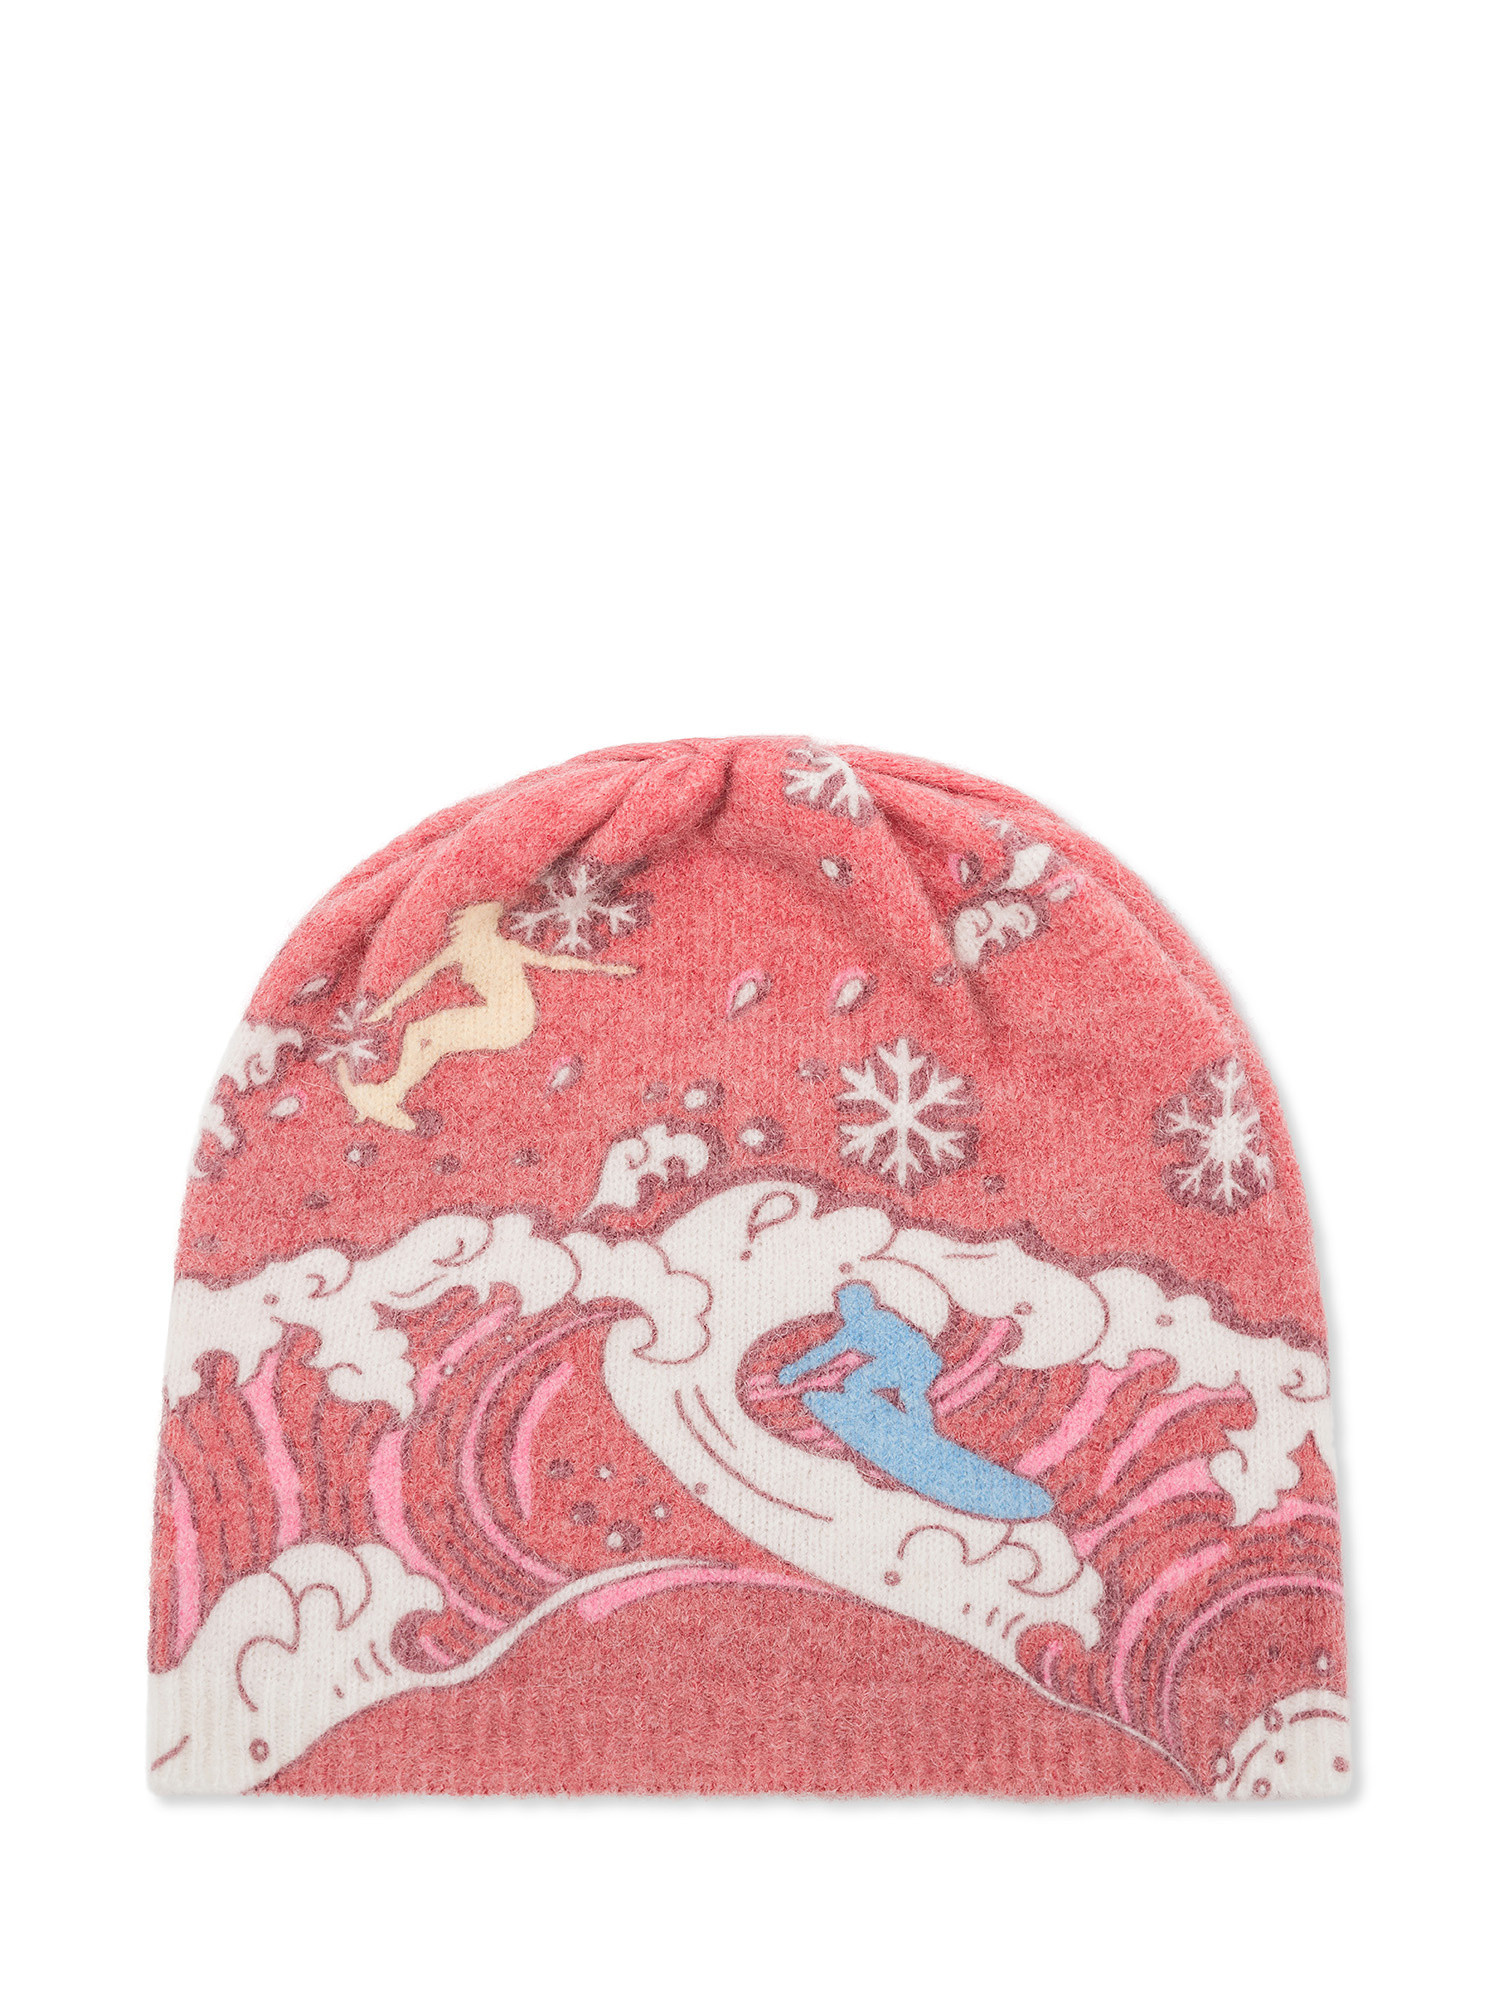 The Surfer's Christmas cap by Paula Cademartori, Red, large image number 0